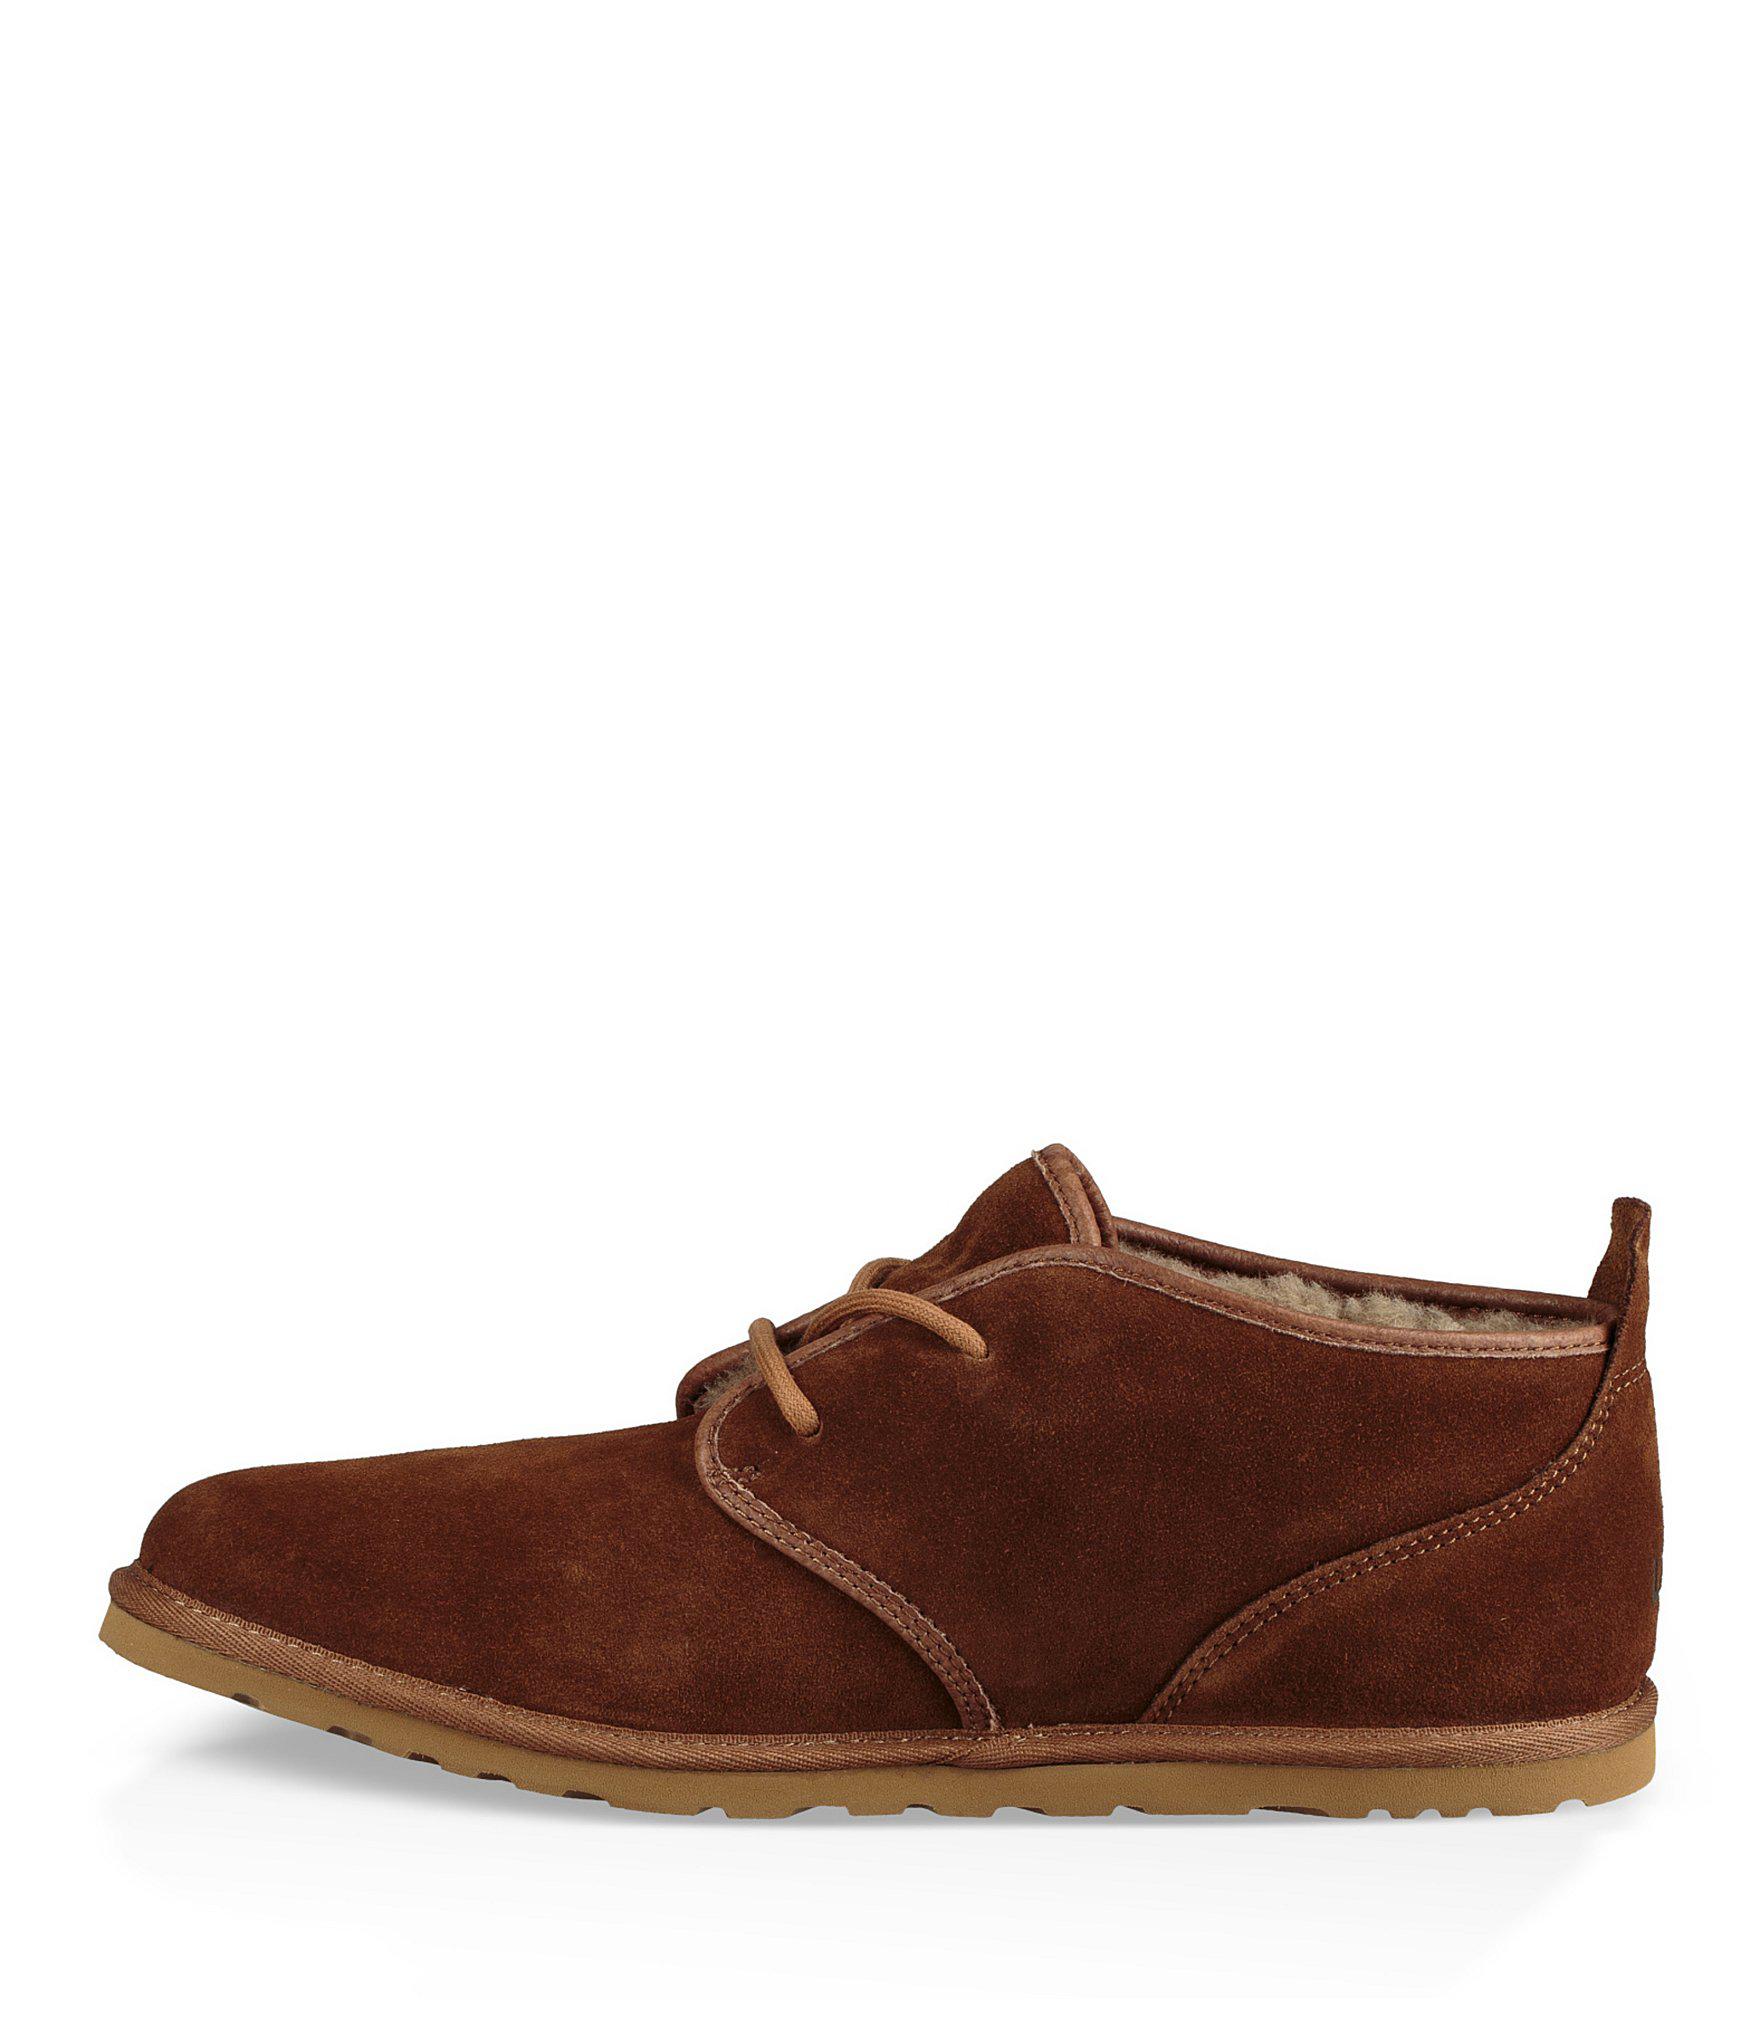 Lyst - Ugg ® Men ́s Maksim Soft Suede Lace-up Chukka Boots for Men